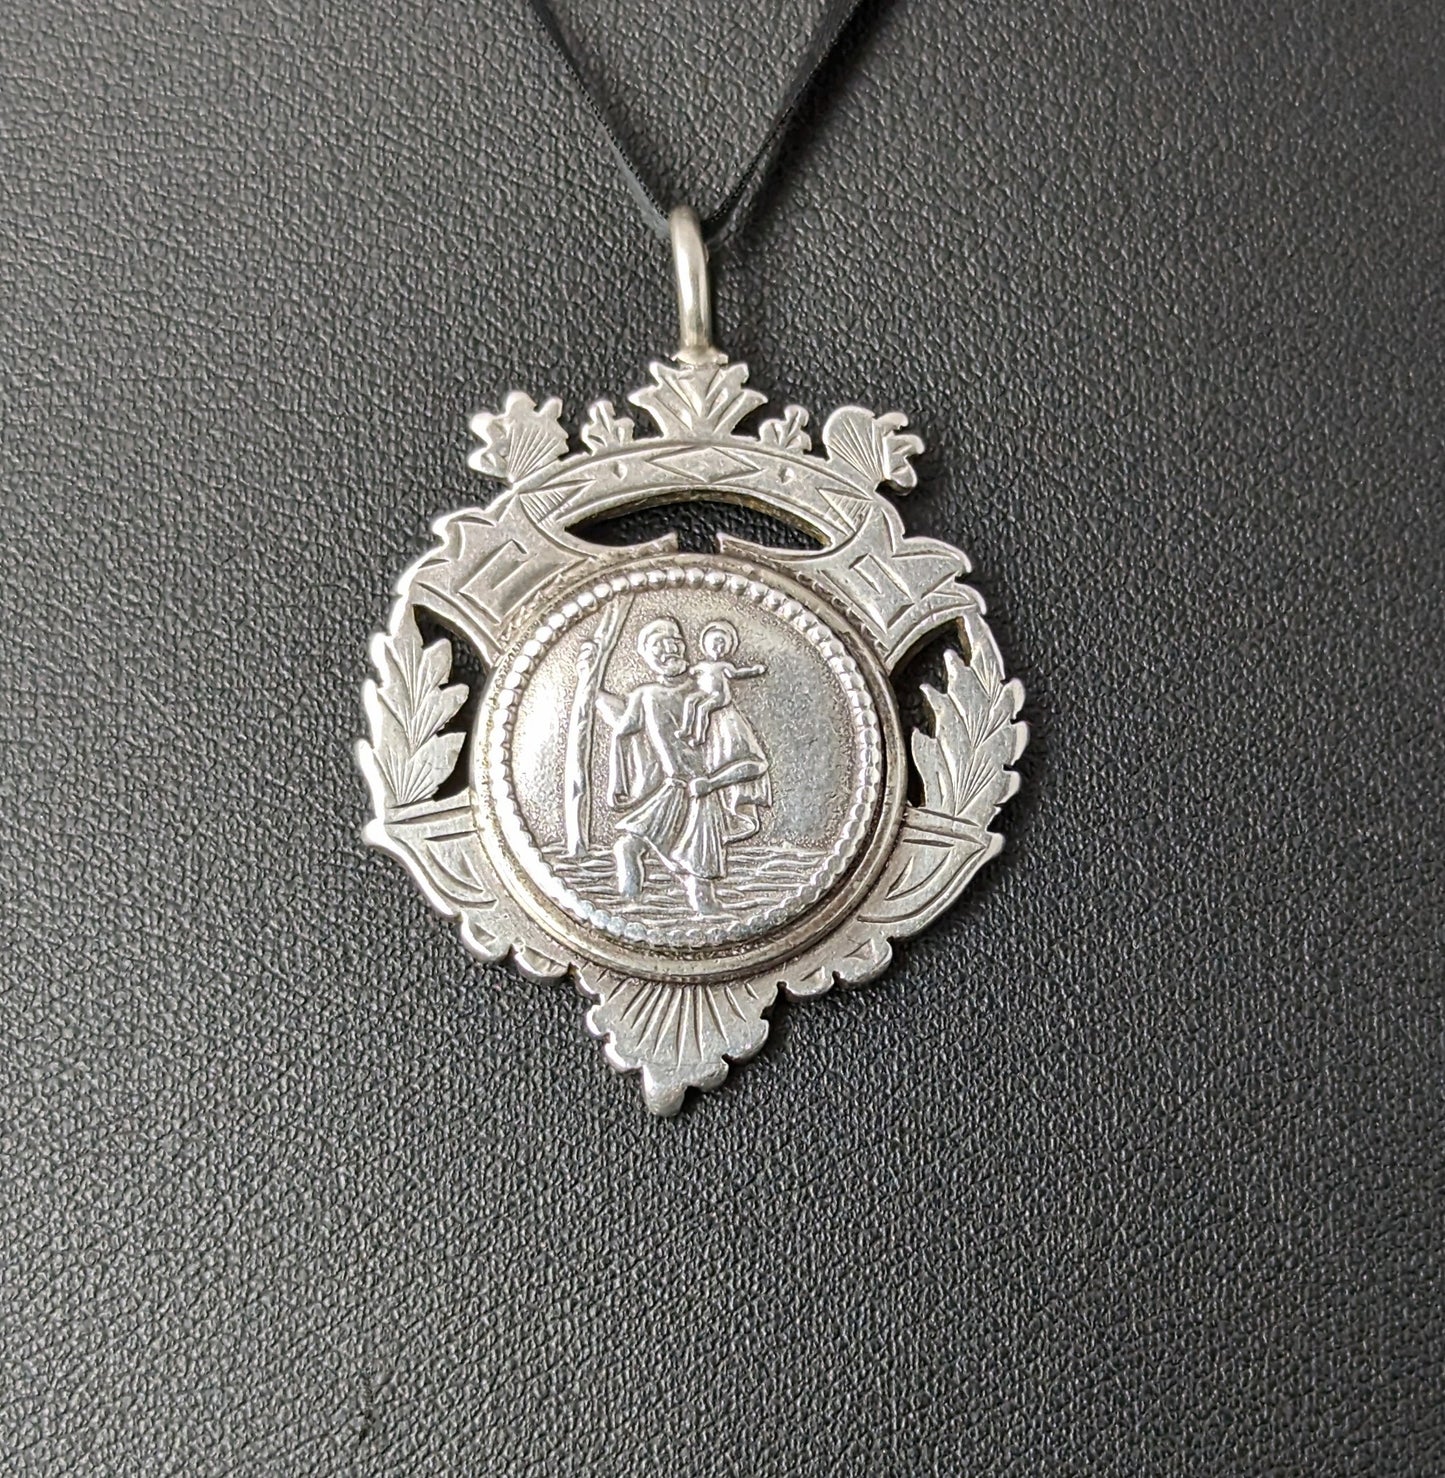 Antique Victorian sterling silver watch fob pendant, St Christopher